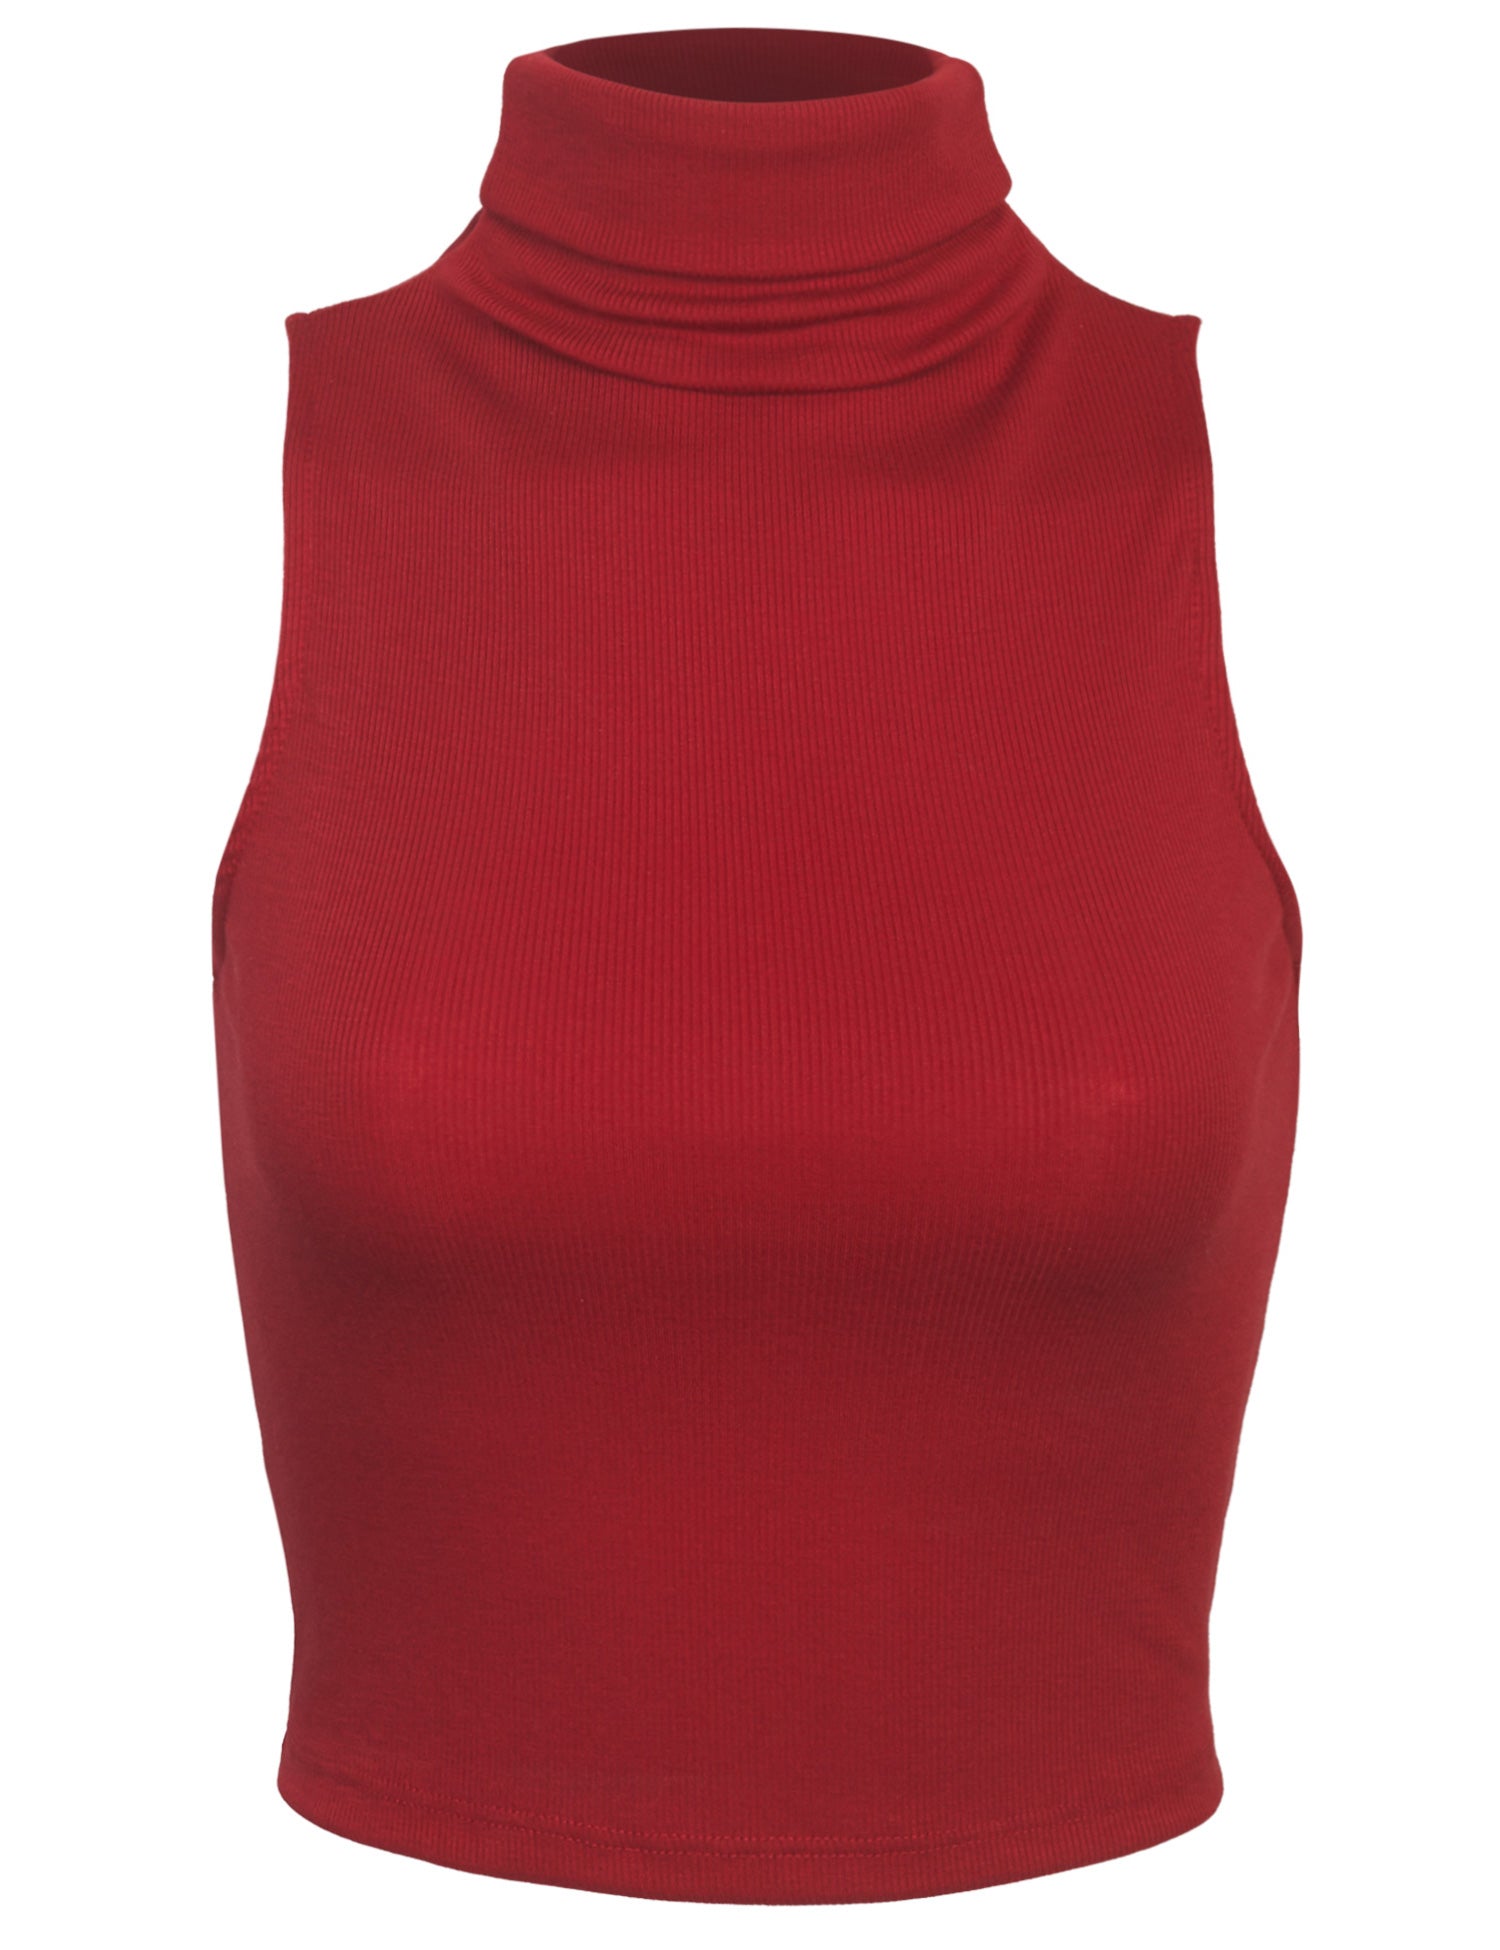 Women's Sleeveless Ribbed Turtleneck Crop Top Knit Made In USA - KOGMO